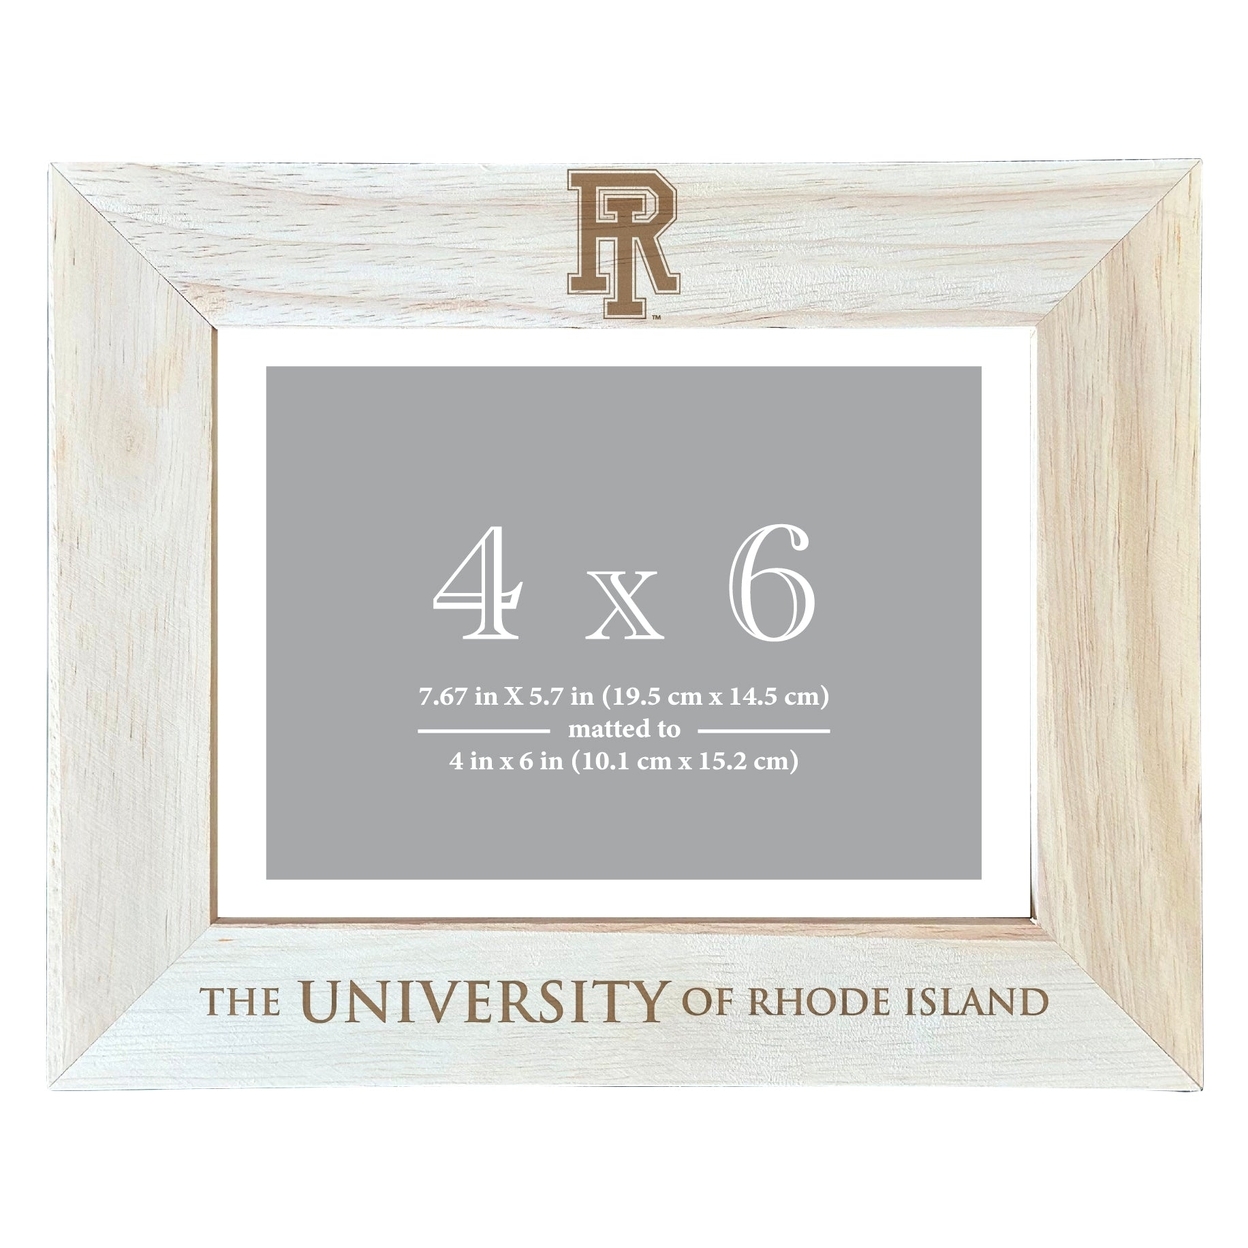 Rhode Island University Wooden Photo Frame Matted To 4 X 6 Inch - Etched